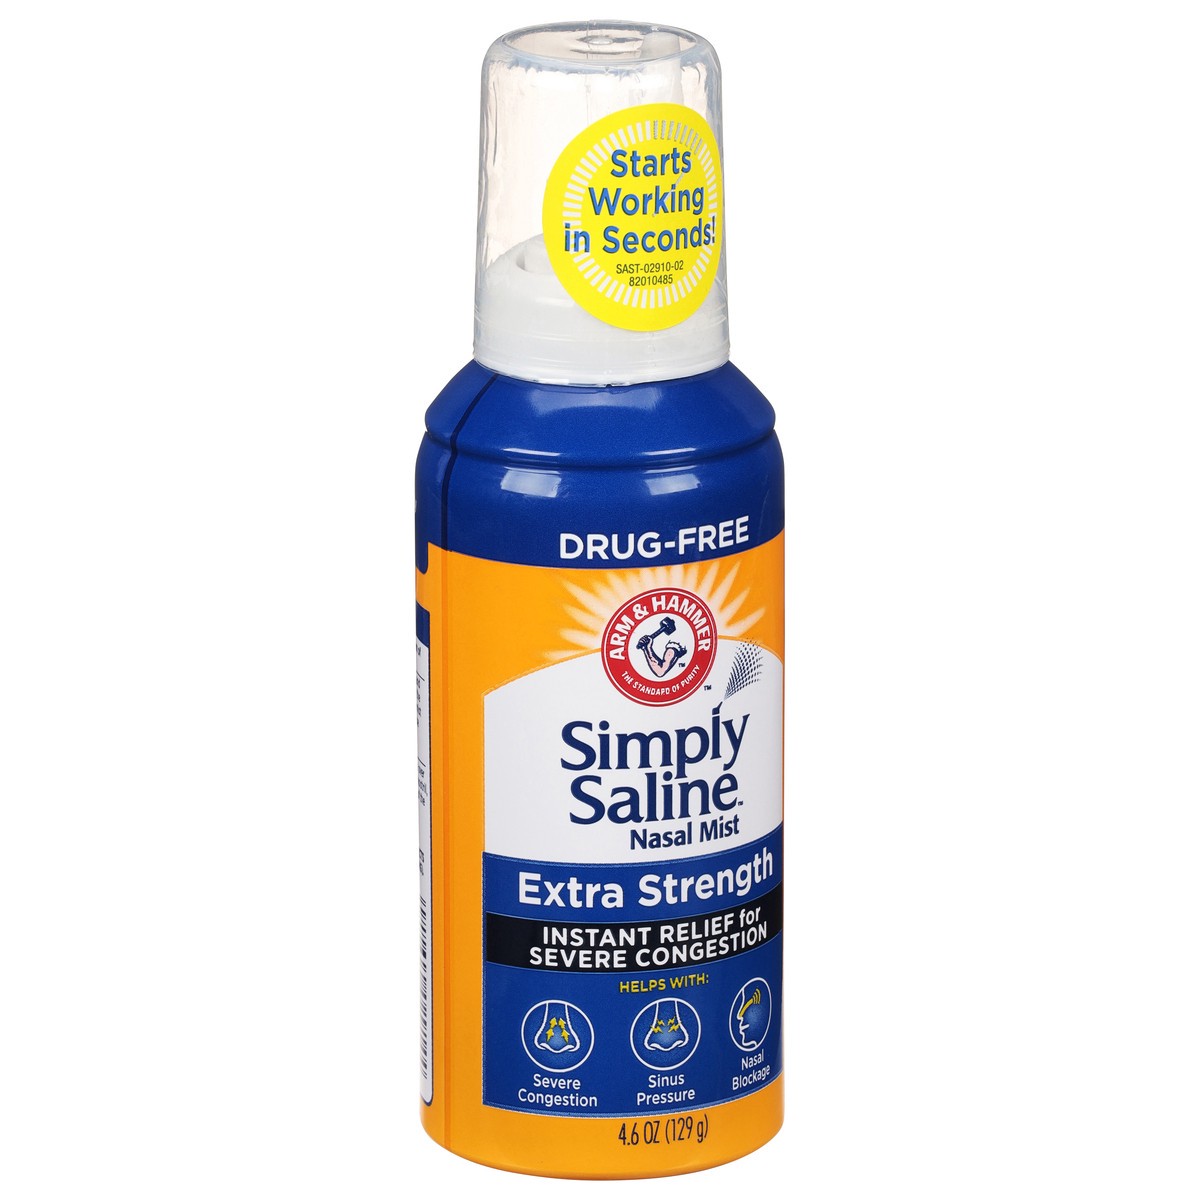 slide 4 of 9, Simply Saline Extra Strength Nasal Mist 4.6oz- Instant Relief for SEVERE Congestion- One 4.6oz Bottle, 4.60 fl oz